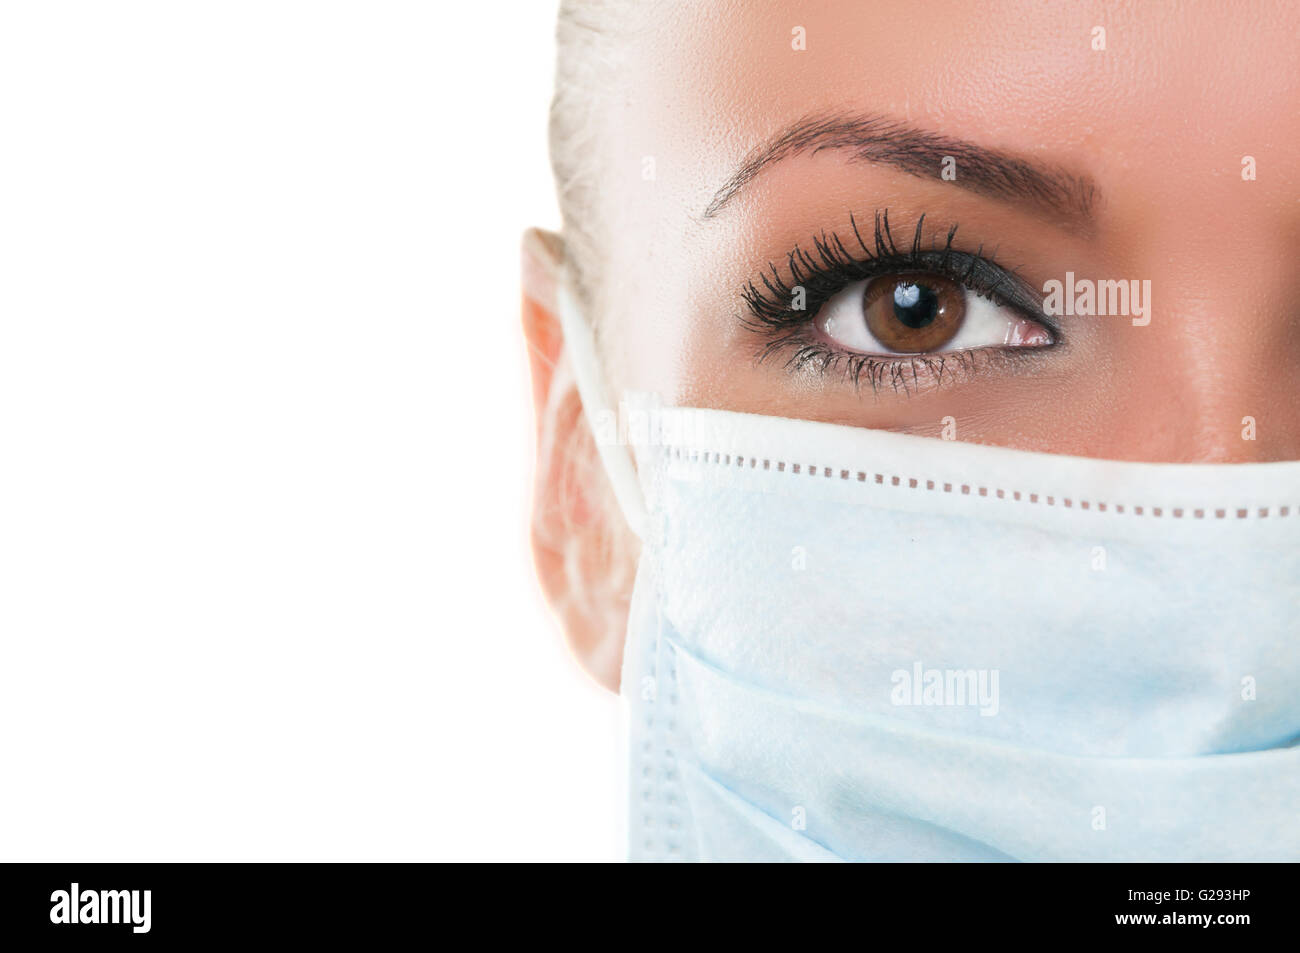 Close-up of eye and mask of doctor assistant isolated on white background Stock Photo